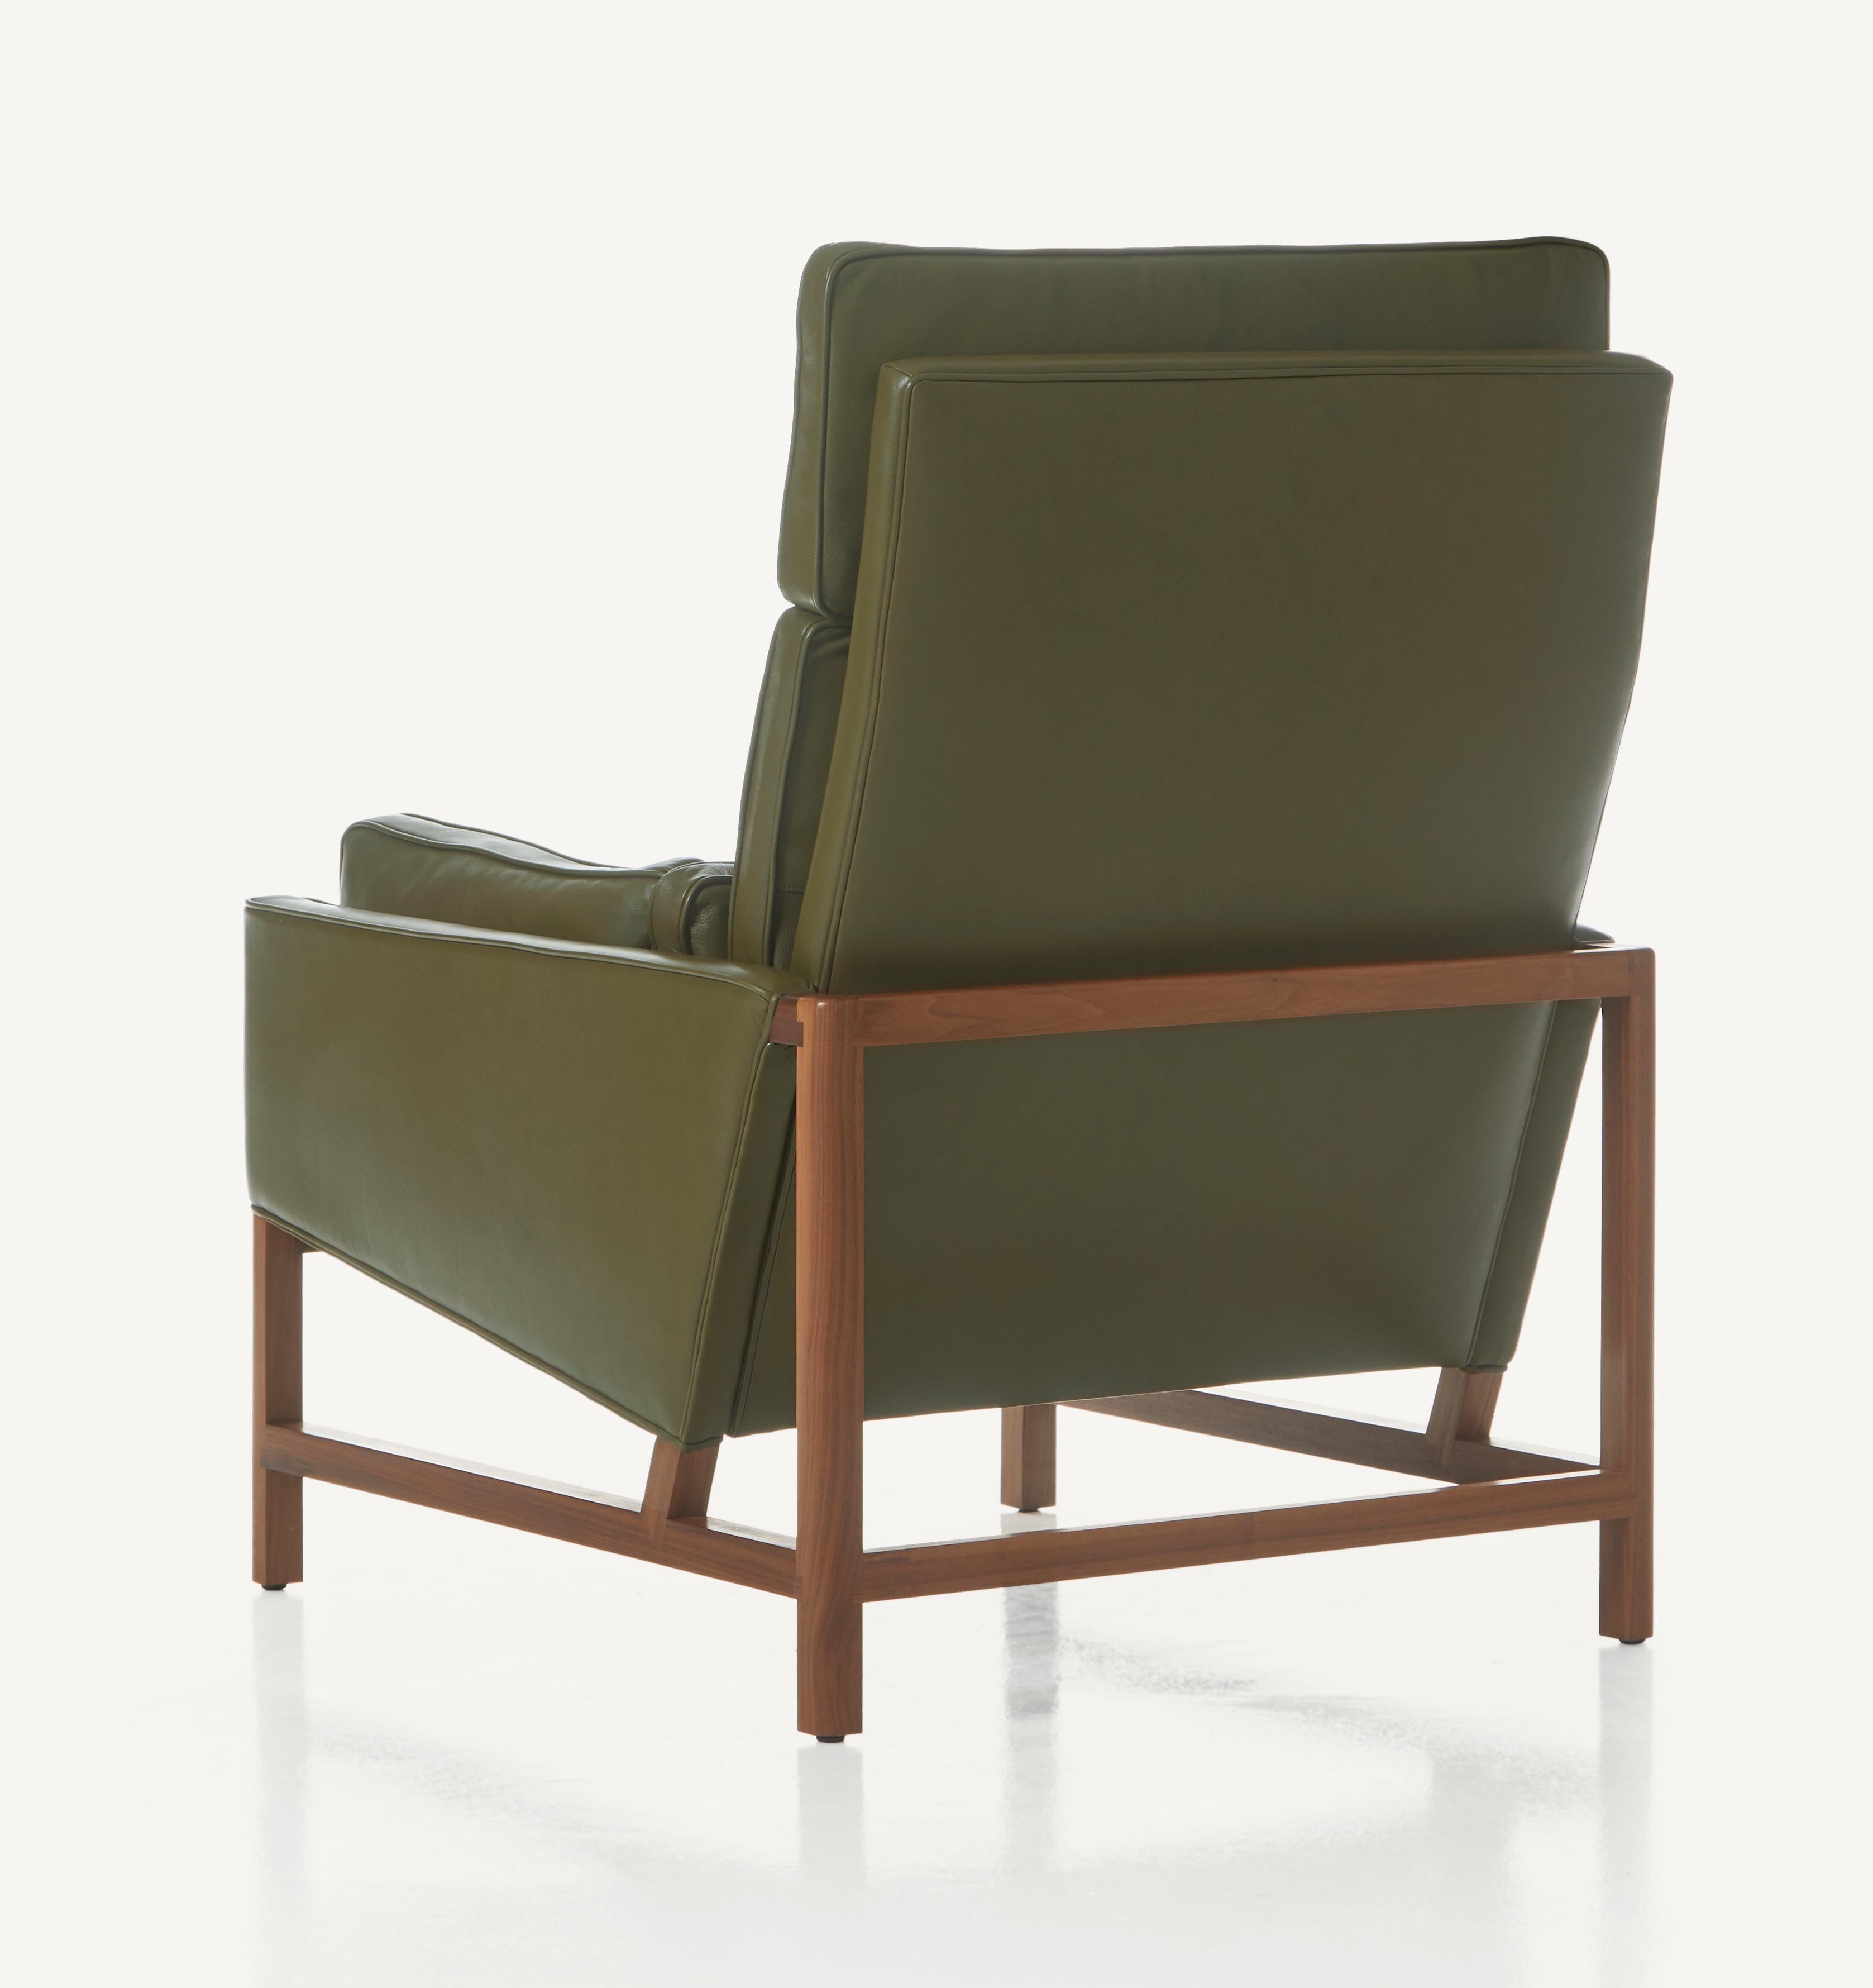 For Sale: Brown (Elegant 48027 Olive) Wood Frame High Back Lounge Chair in Walnut and Leather Designed by Craig Bassam 2